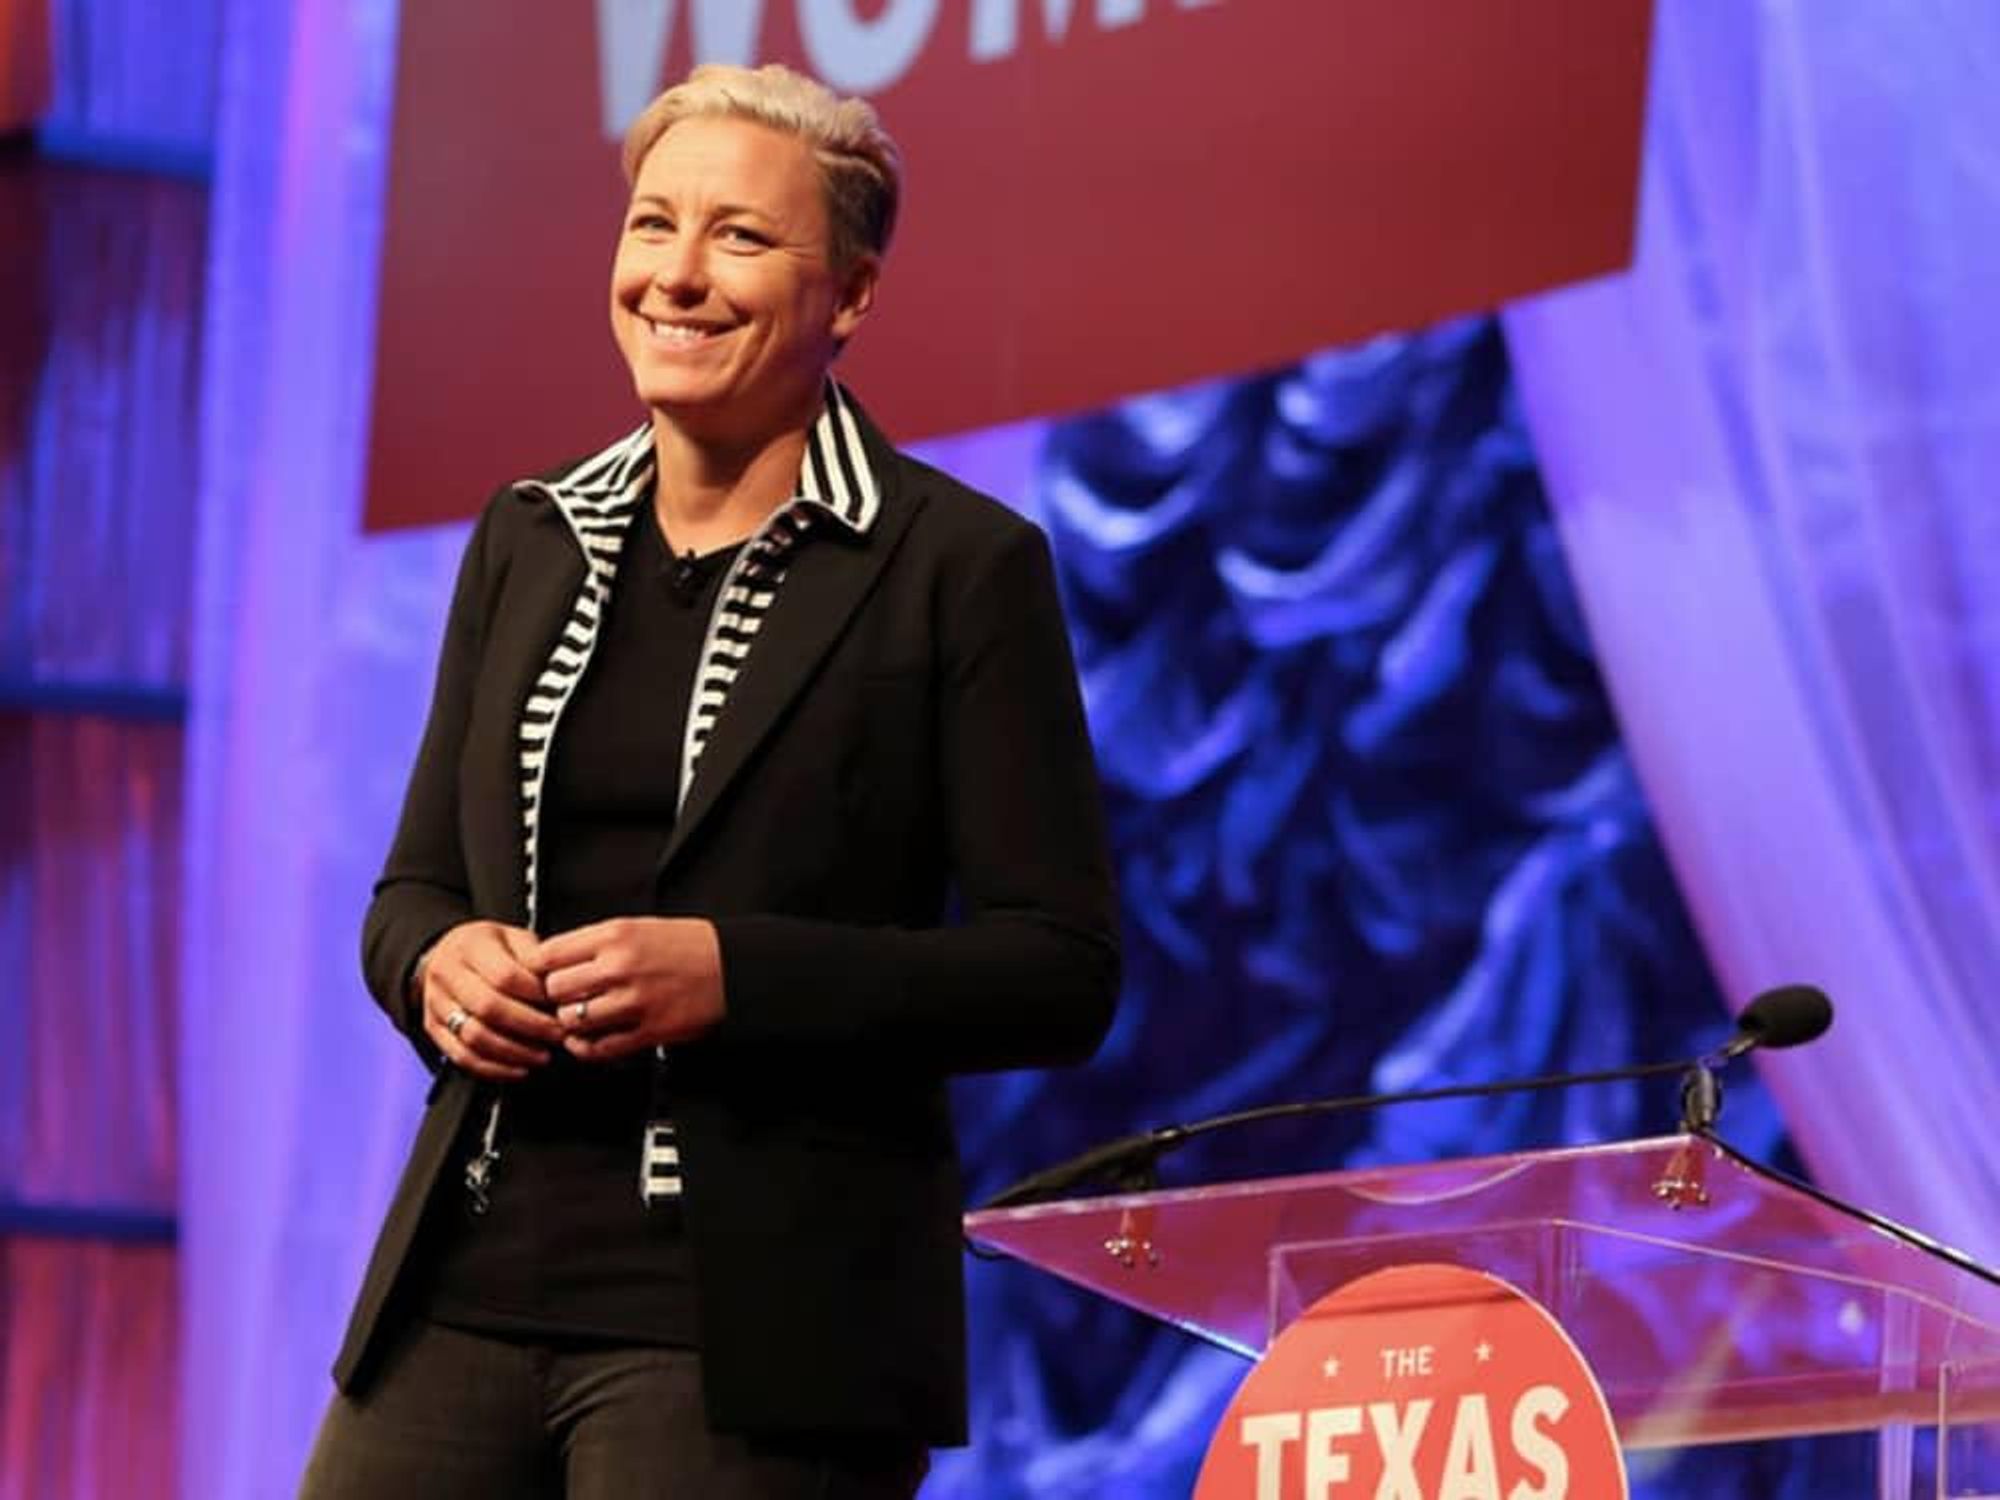 Texas Conference for Women 2016 Abby Wambach